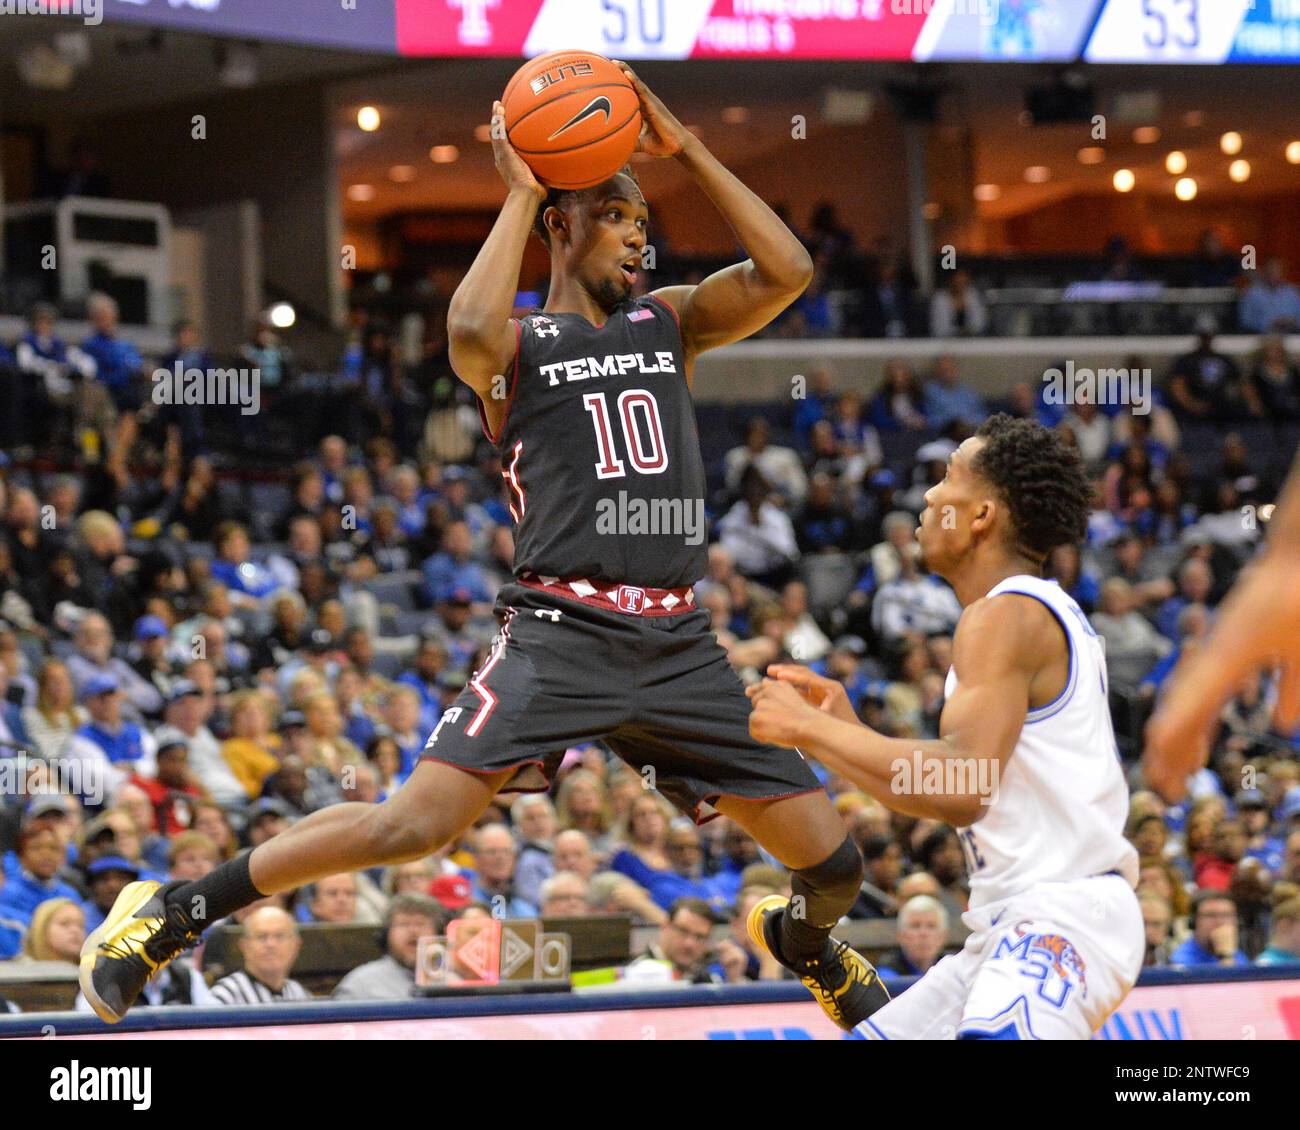 February 26, 2019: Temple guard, Shizz Alston Jr. (10), makes a jumping  pass during the NCAA basketball game between the Temple Owls and the  Memphis Tigers at the Fed Ex Forum in